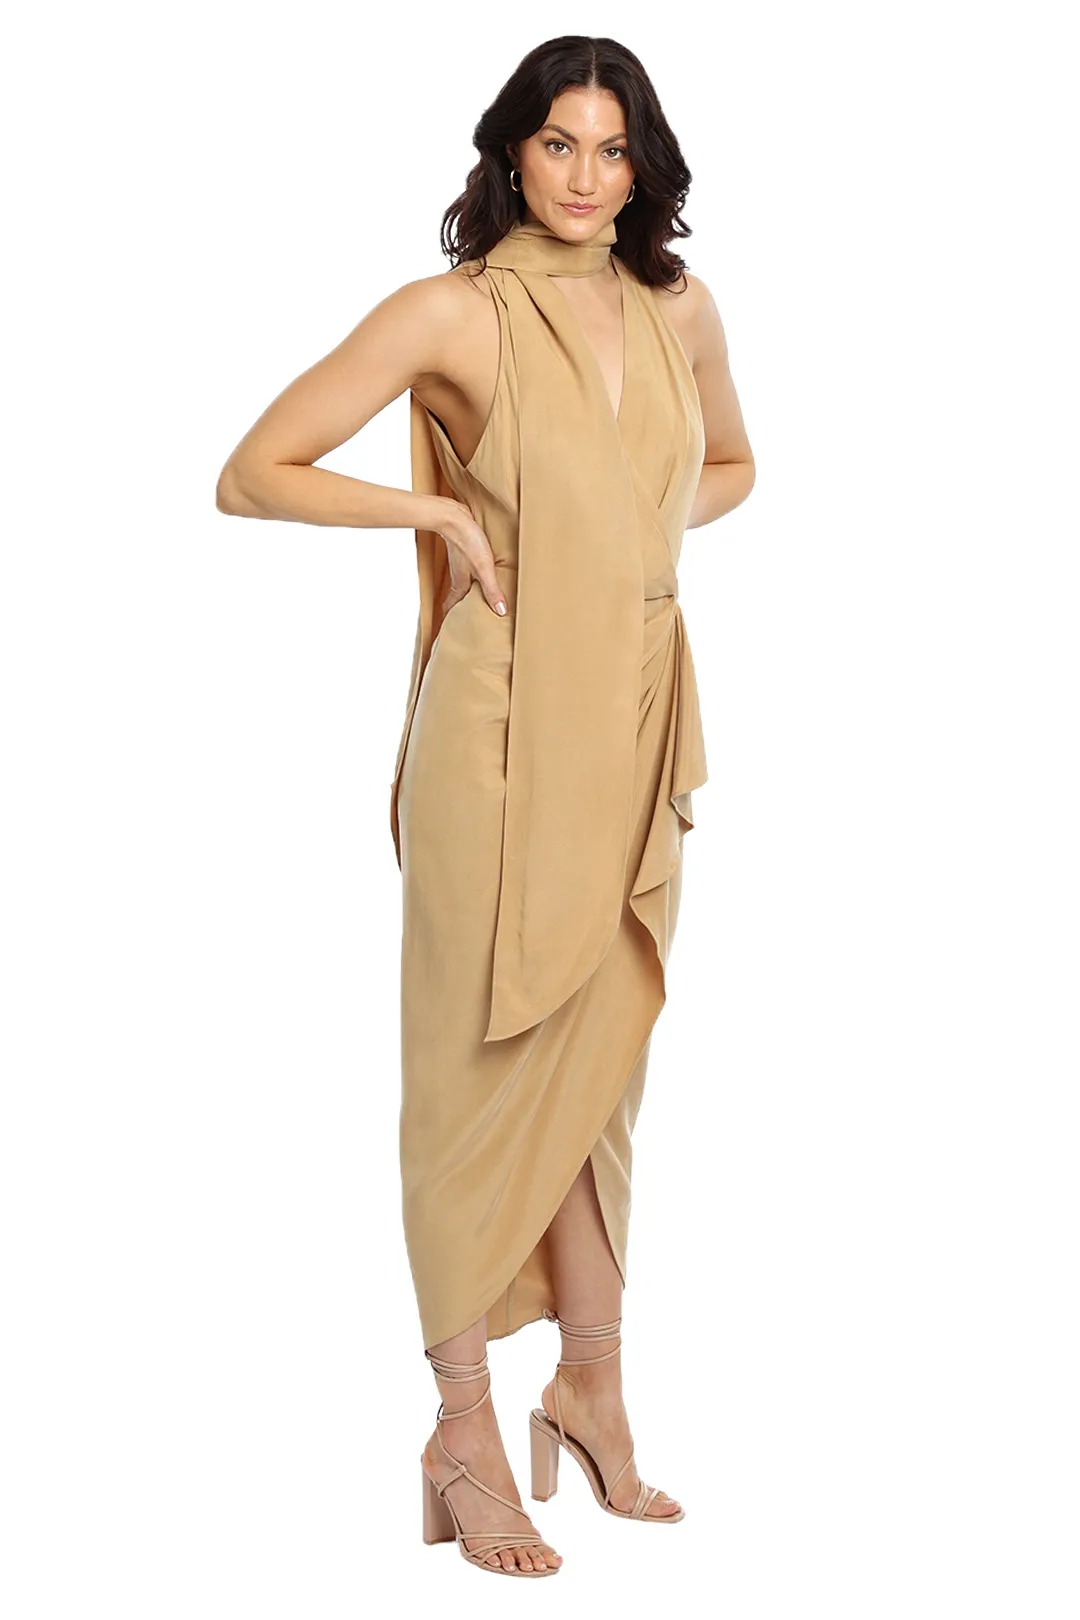 Rent Daleside dress in nude for wedding guests.